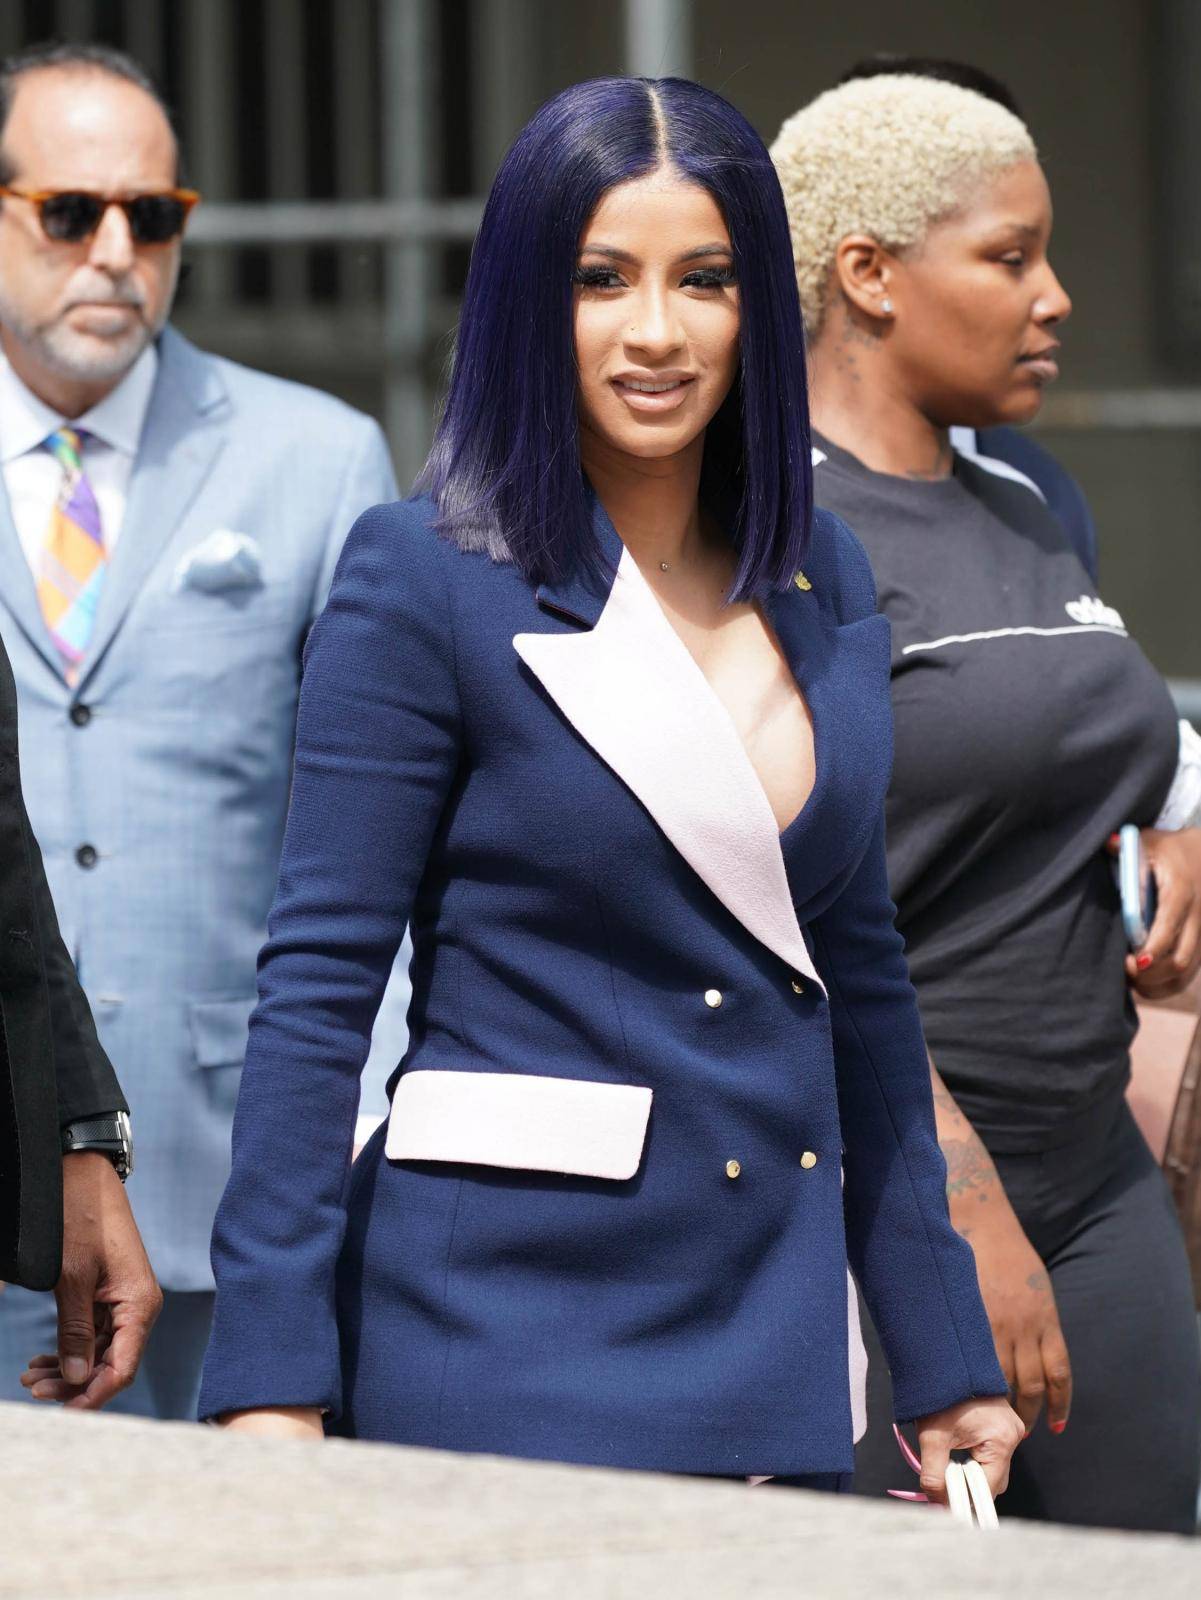 Cardi B Pleads Not Guilty at her arraignment